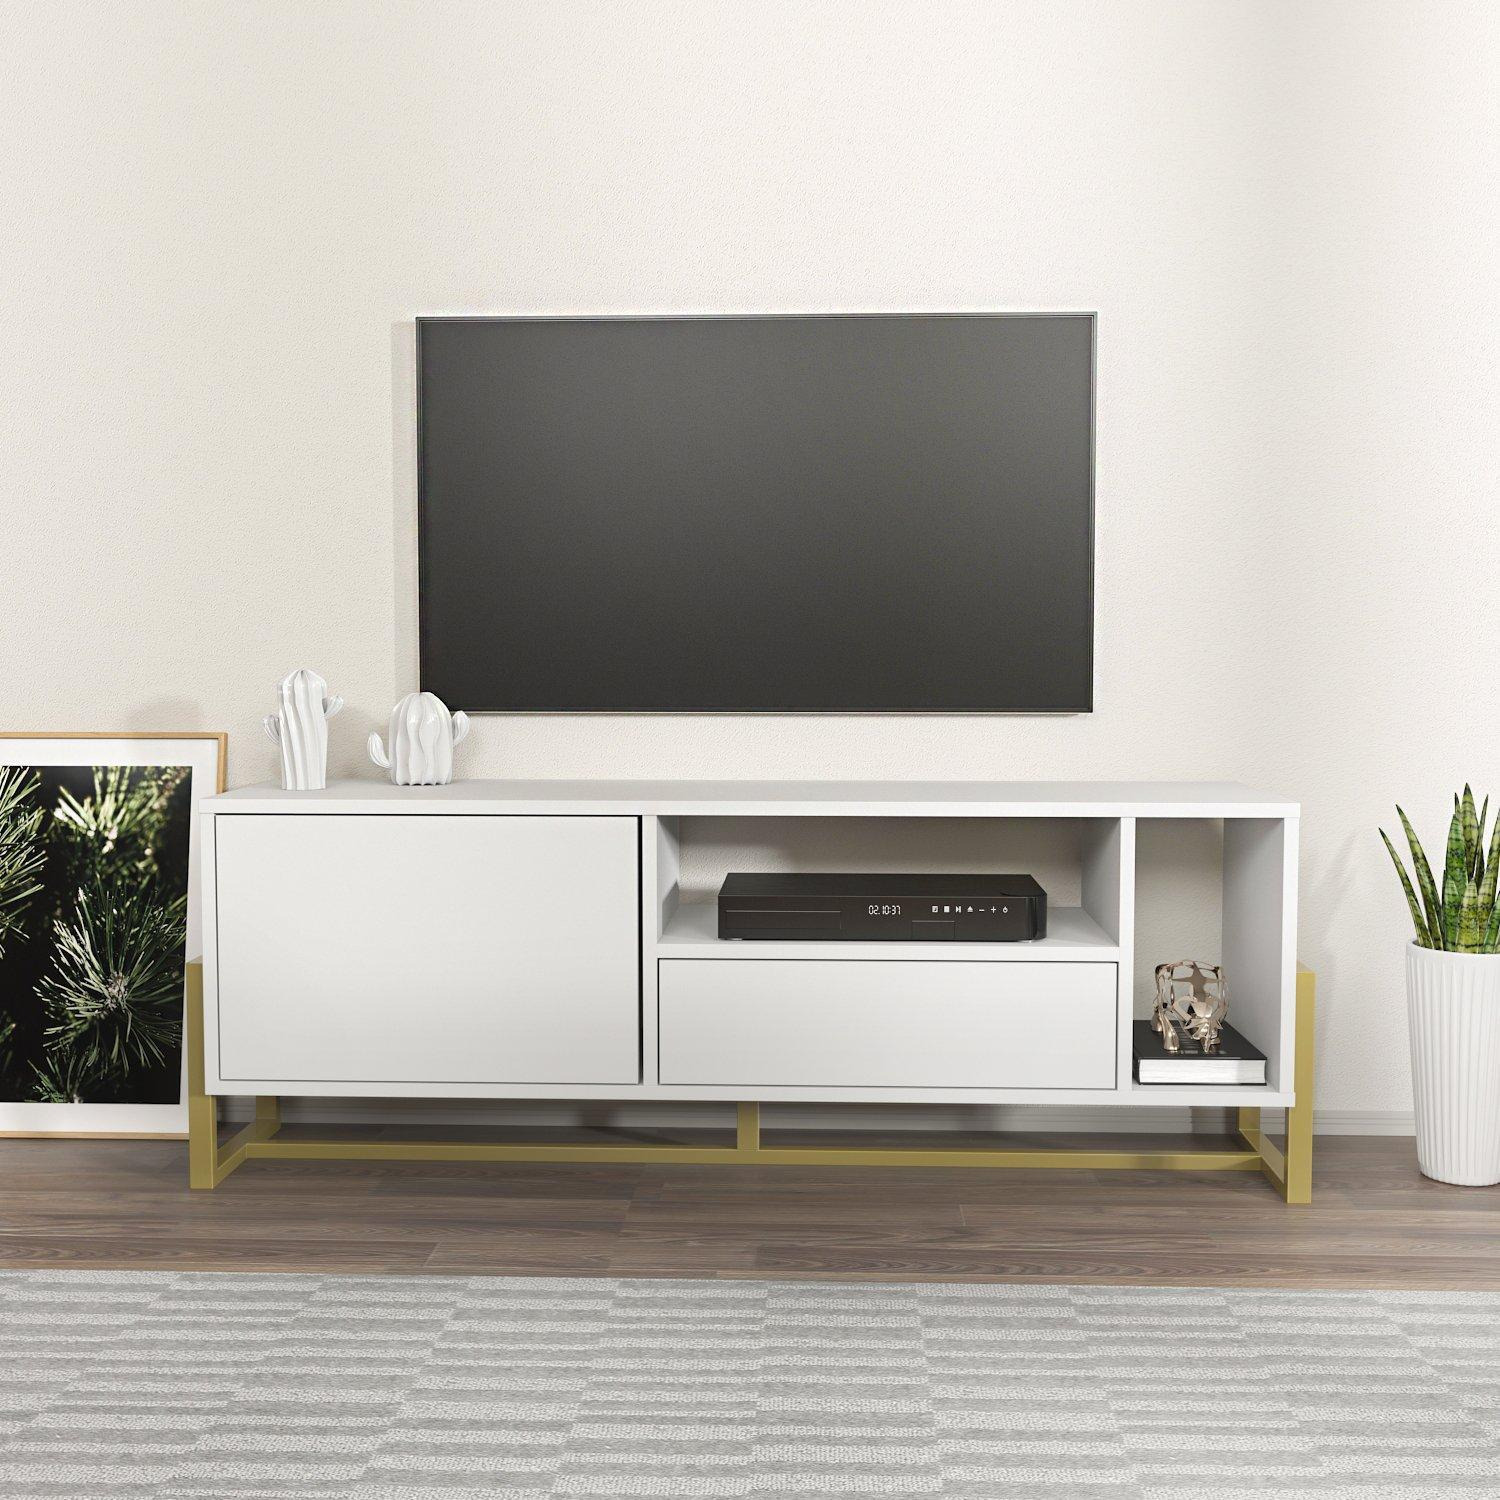 Utopia TV Stand TV Unit TV Cabinet with Shelves and One Cabinet - image 1